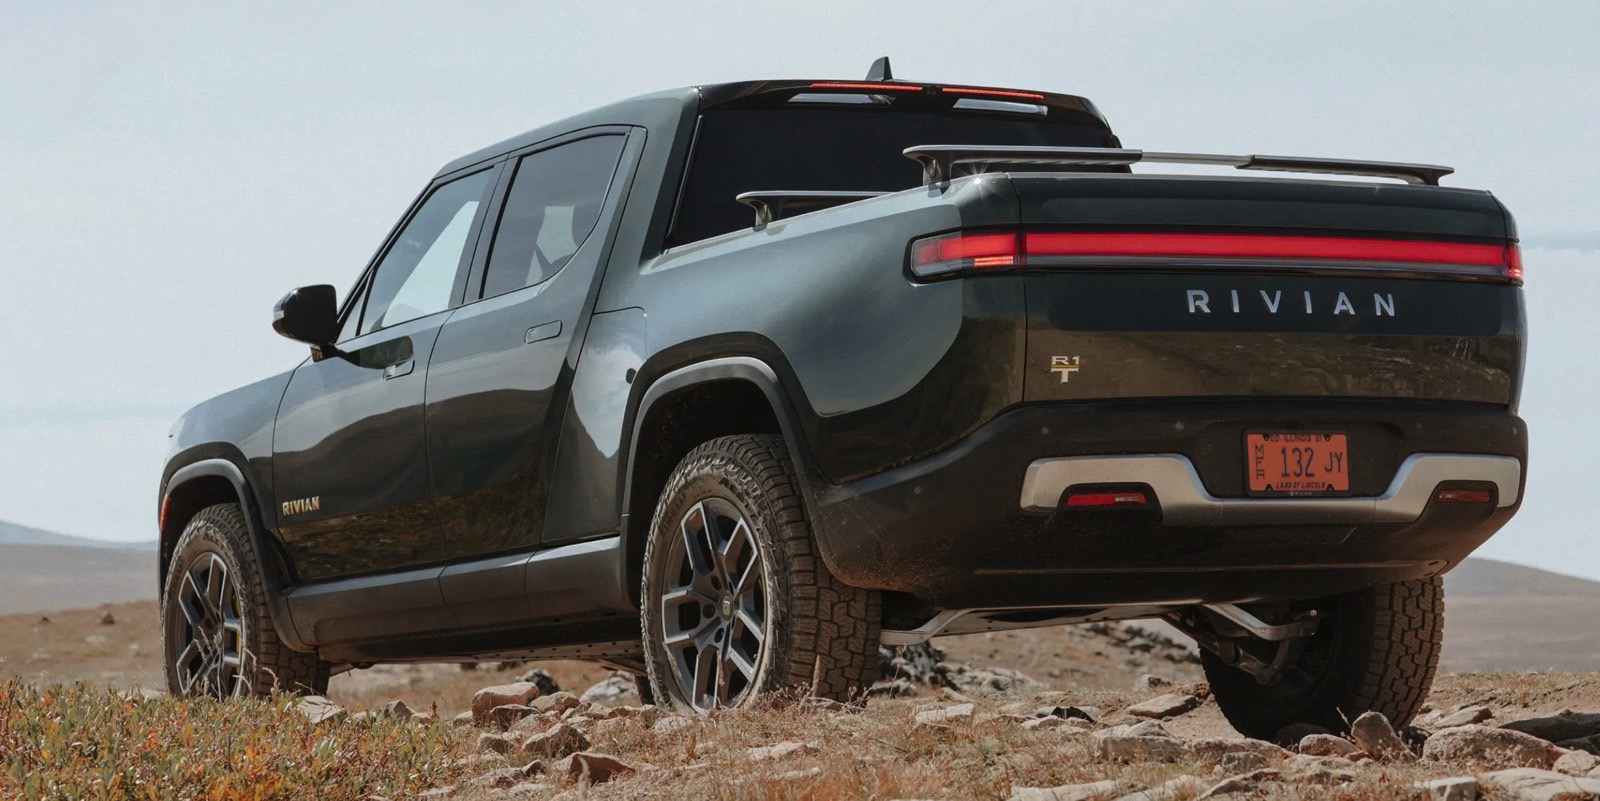 Some Rivian and Volkswagen models are once again eligible for the EV tax credit